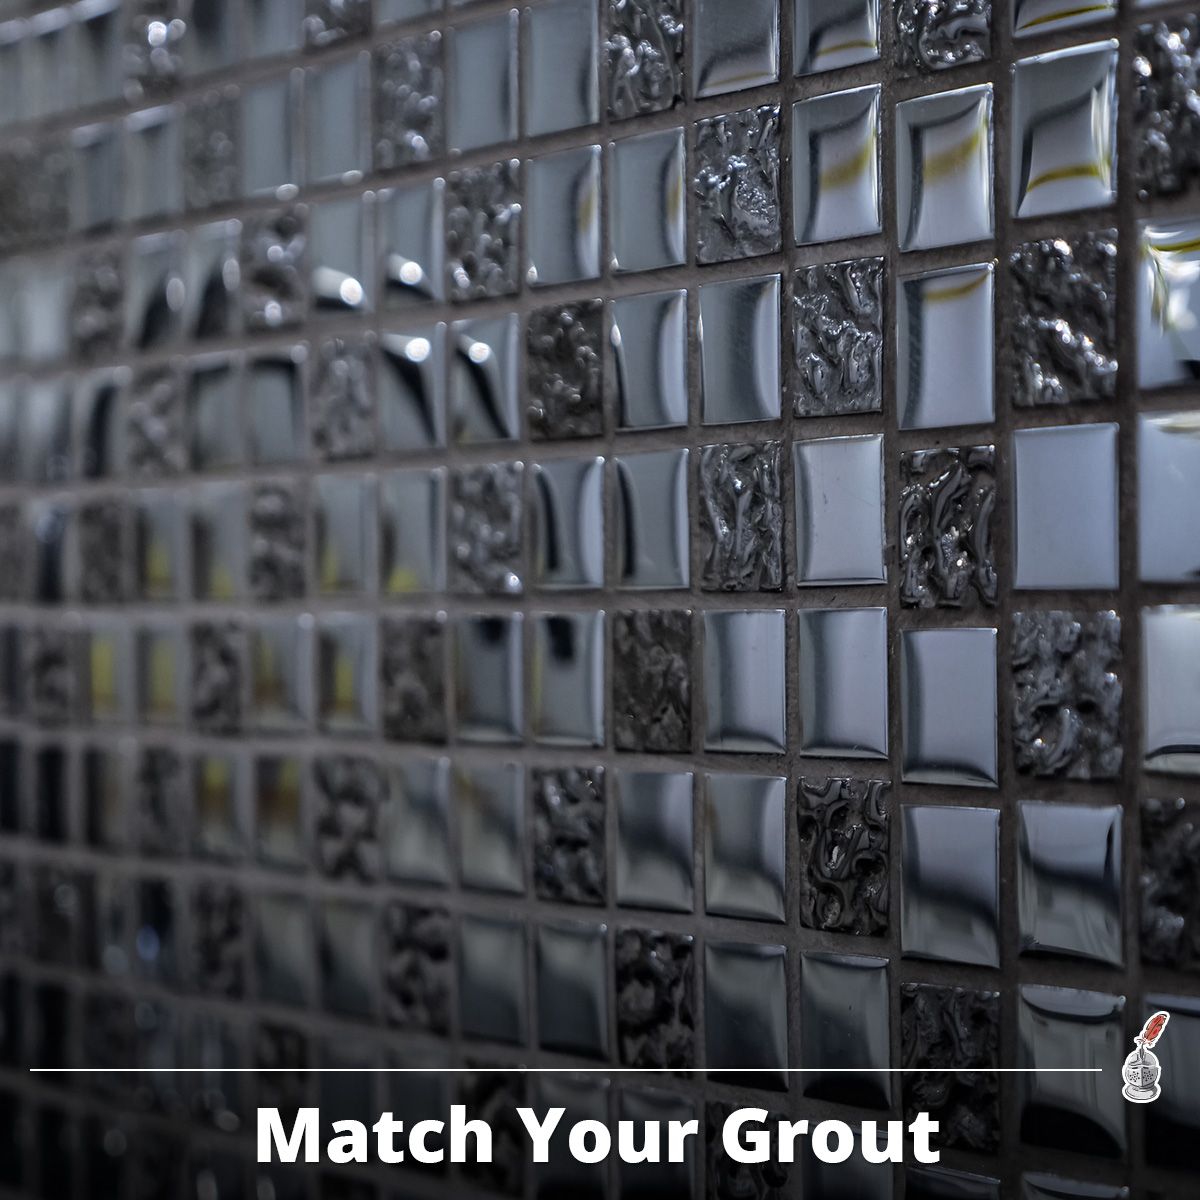 Match Your Grout